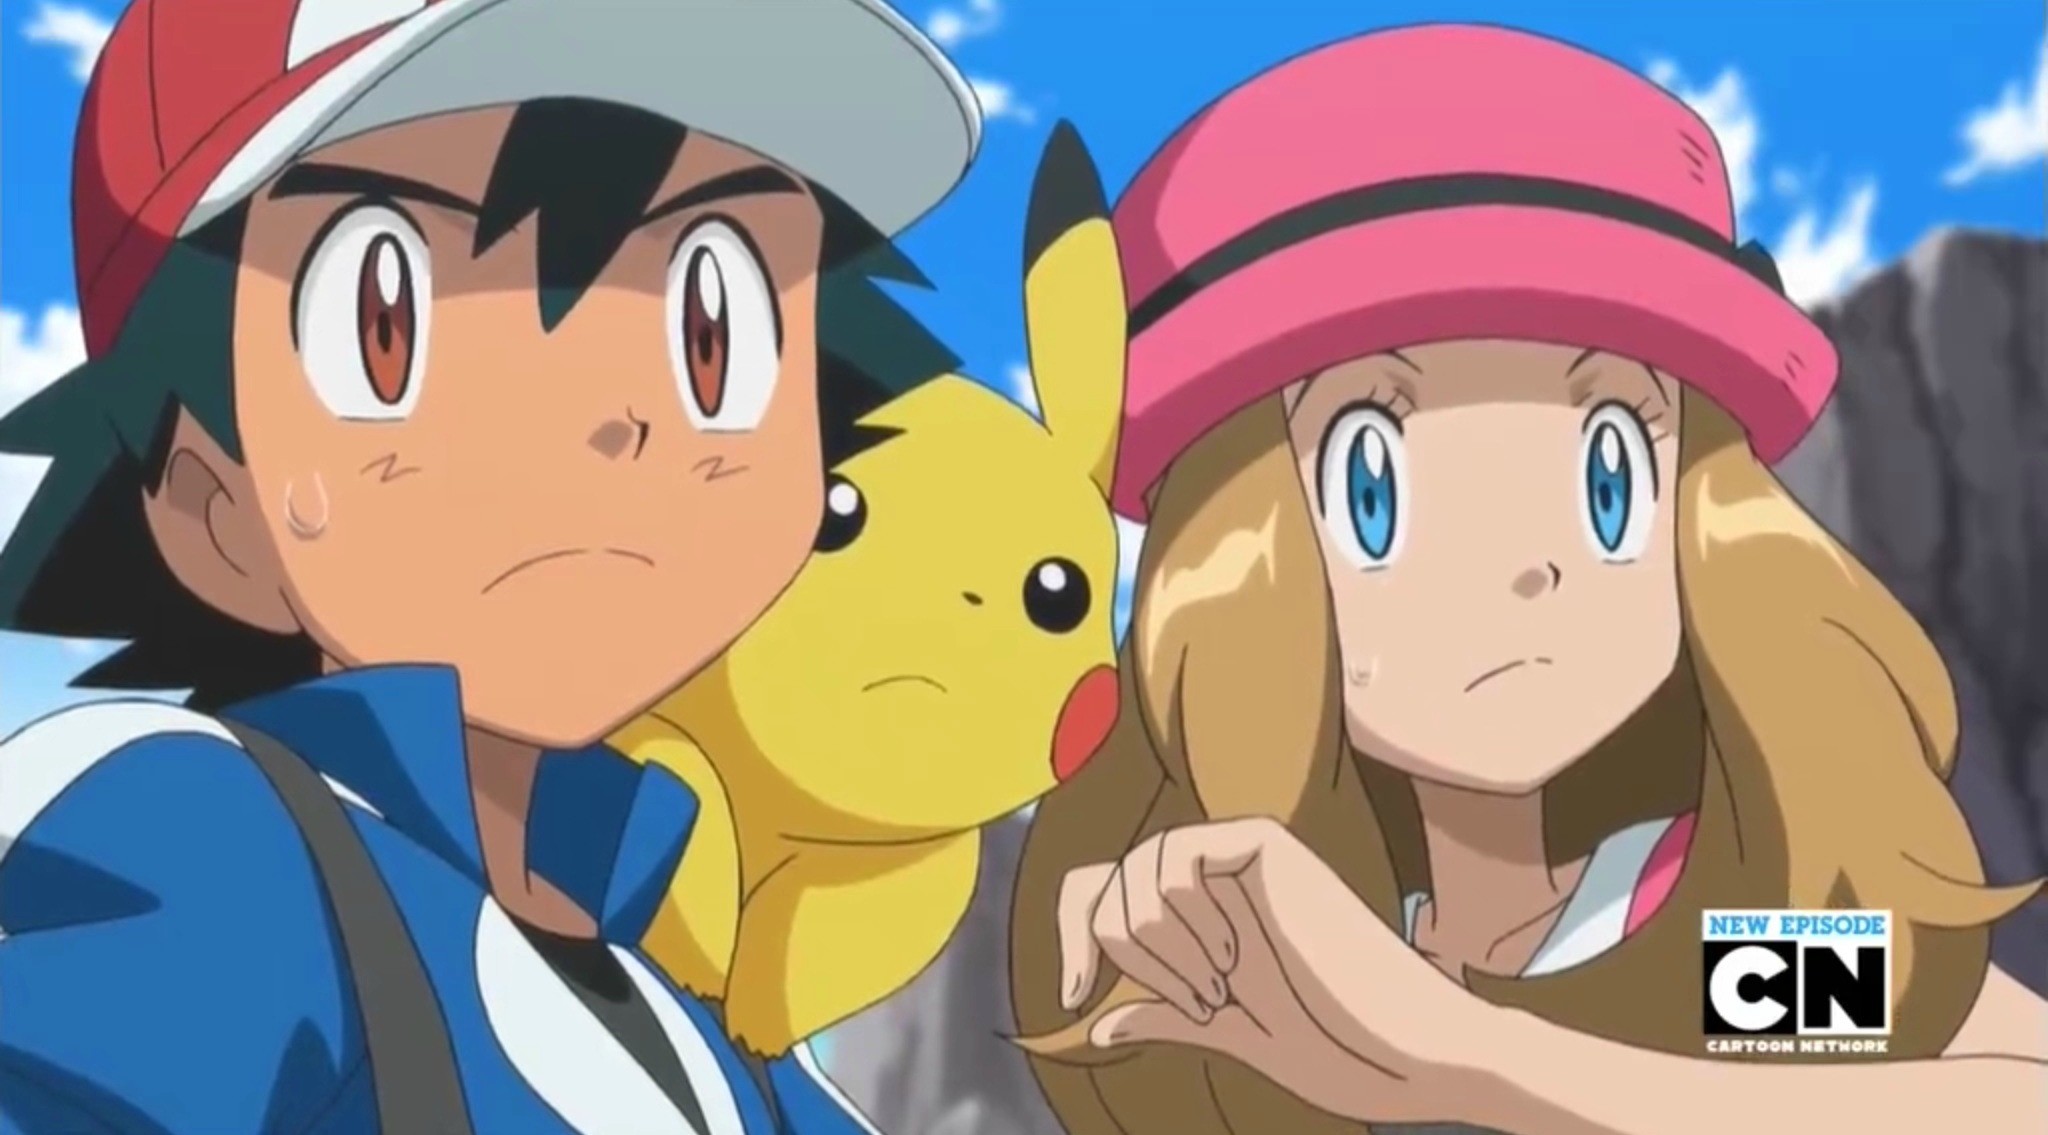 2048x1135 Ash and Serena images Pokemon XY HD wallpaper and background photos